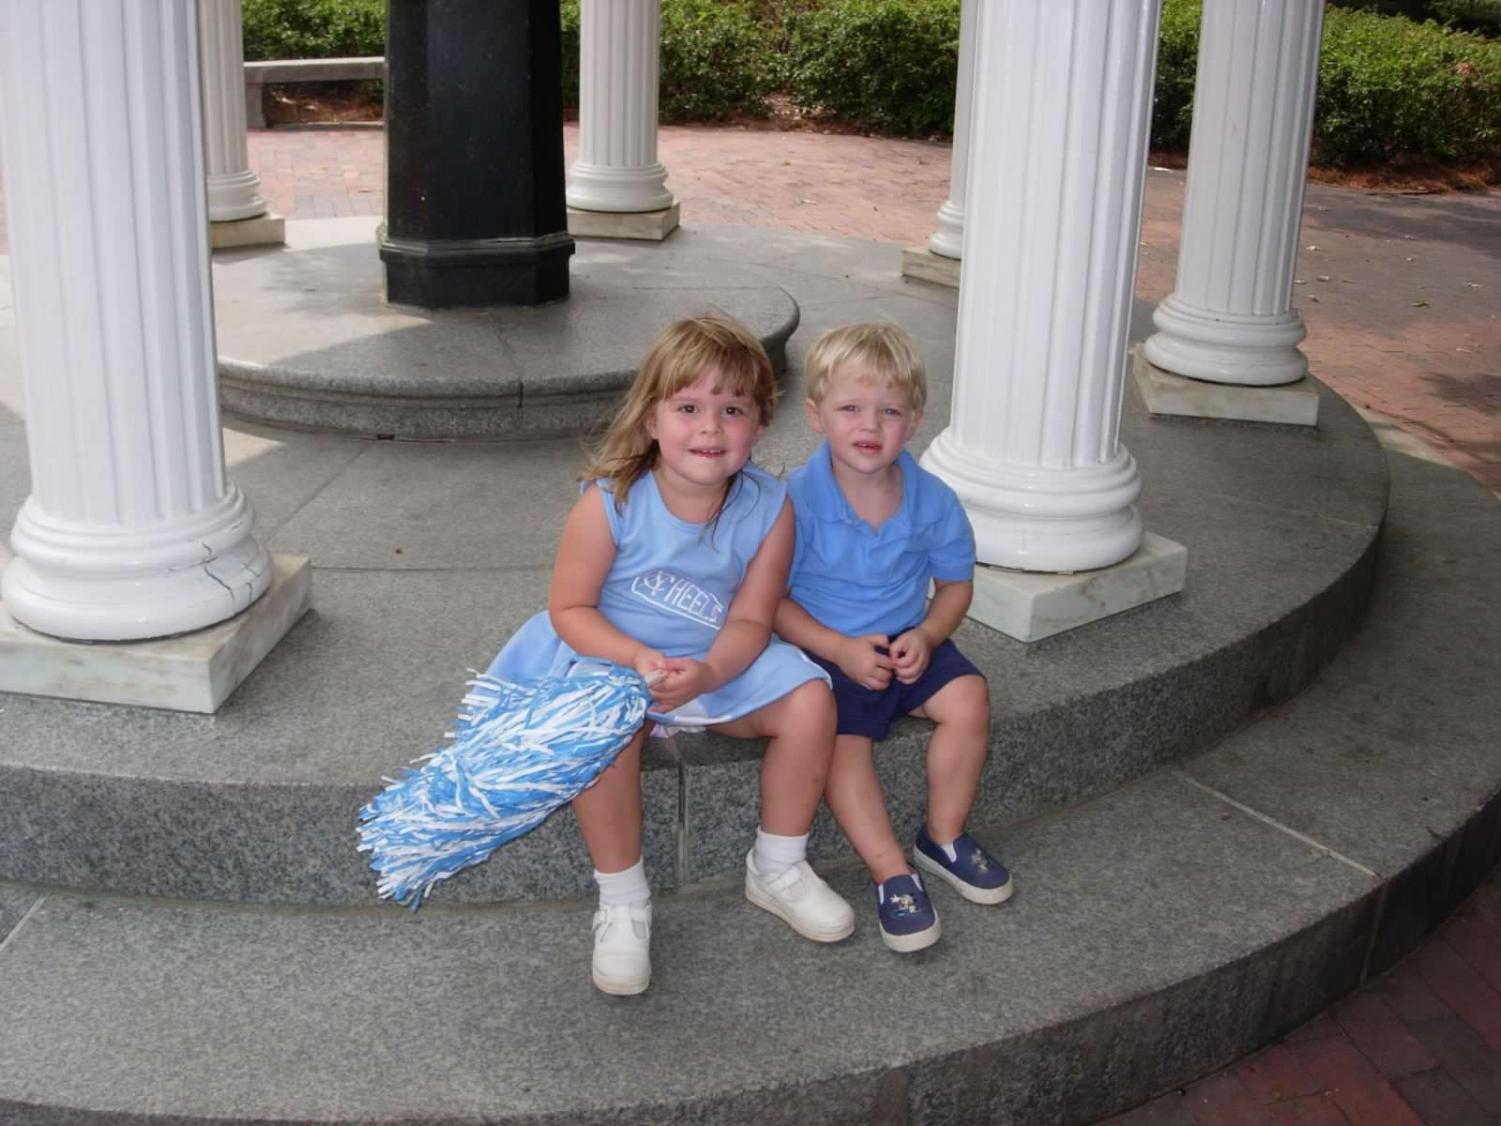 Tommy Beason 24 and his sister Kendall sitting by the Old Well at UNC Chapel Hill, awaiting a football game in 2008. (Sallie Beason)